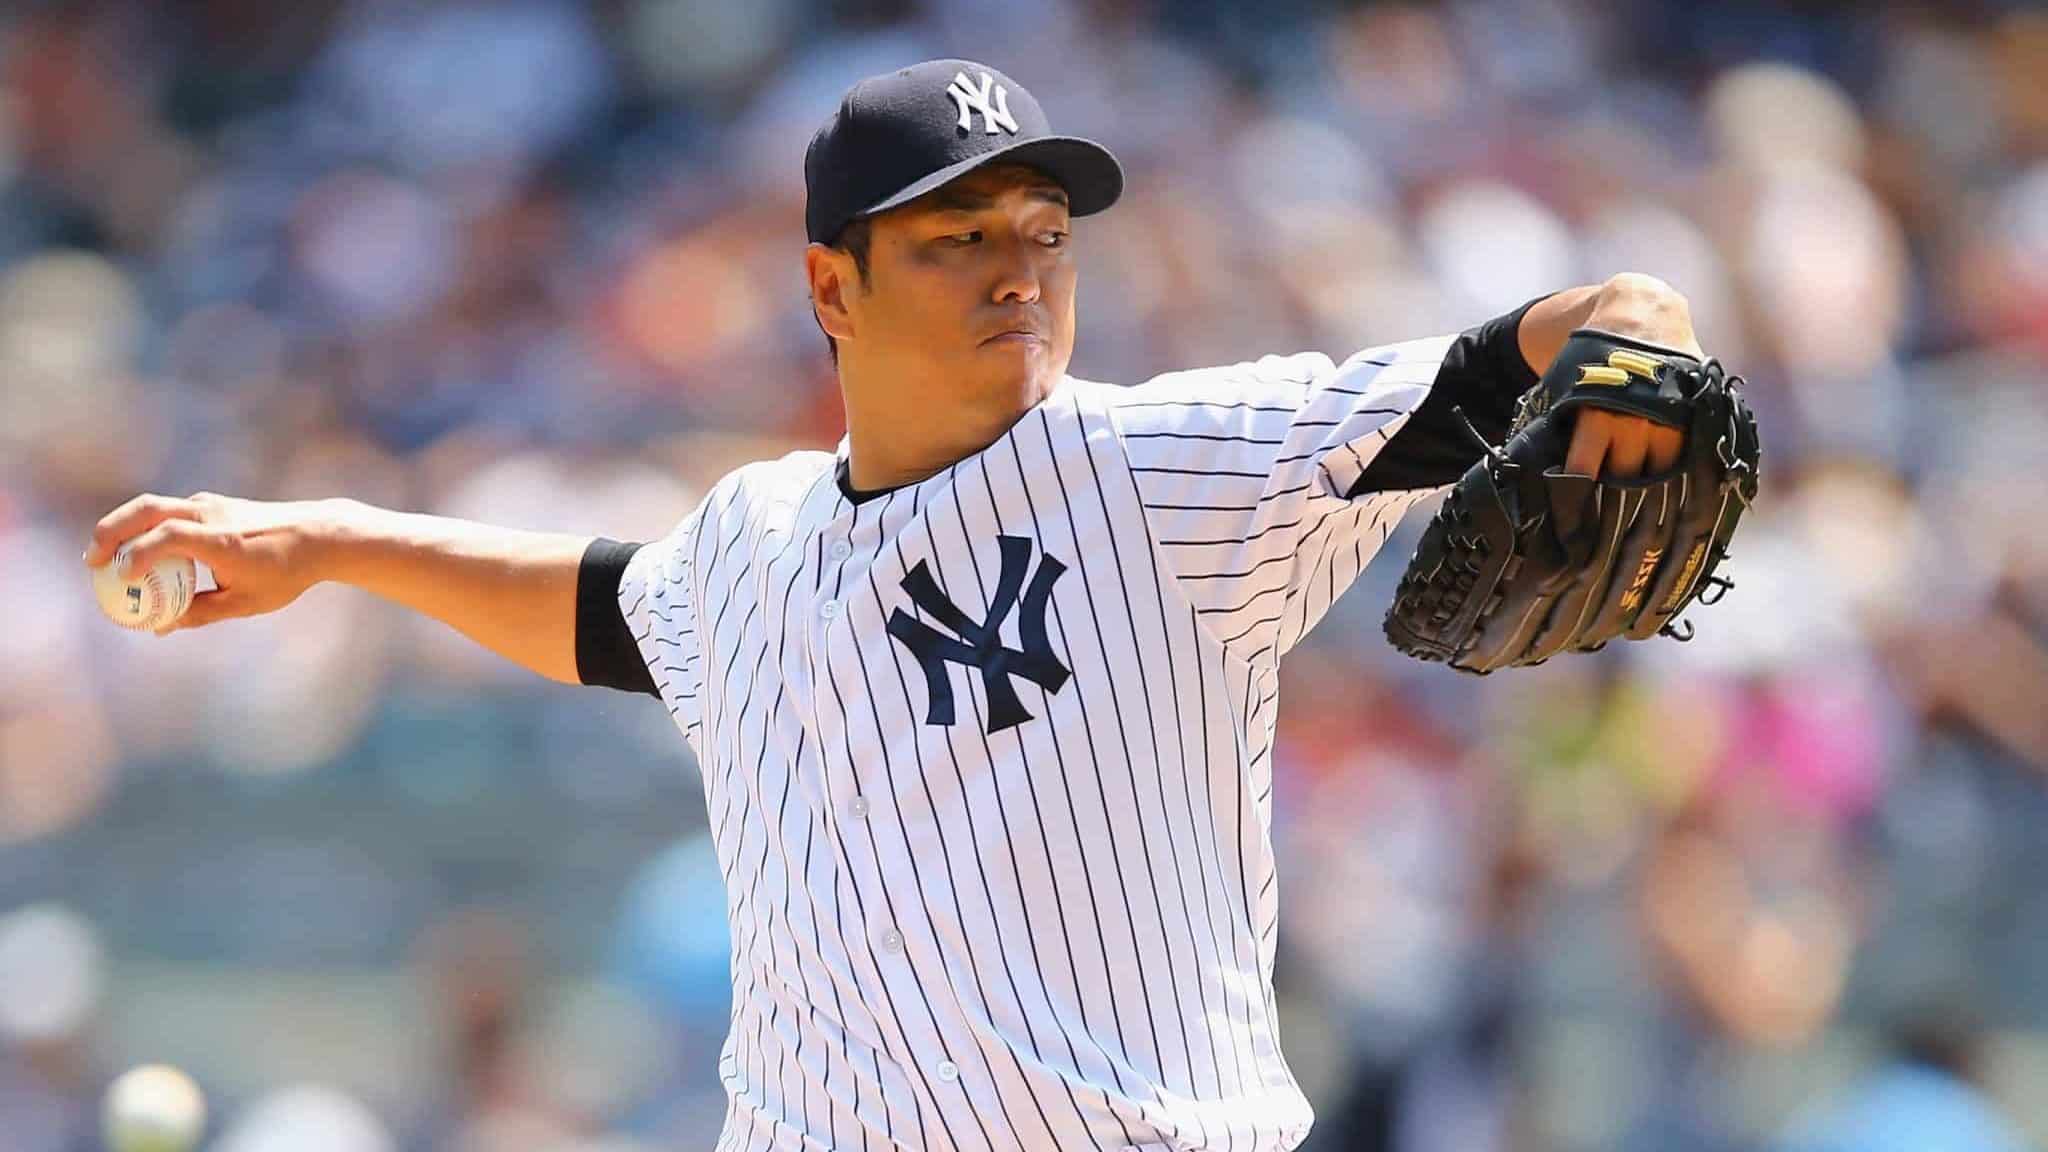 NEW YORK, NY - AUGUST 10: Hiroki Kuroda #18 of the New York Yankees pitches against the Cleveland Indians during their game at Yankee Stadium on August 10, 2014 in the Bronx borough of New York City.